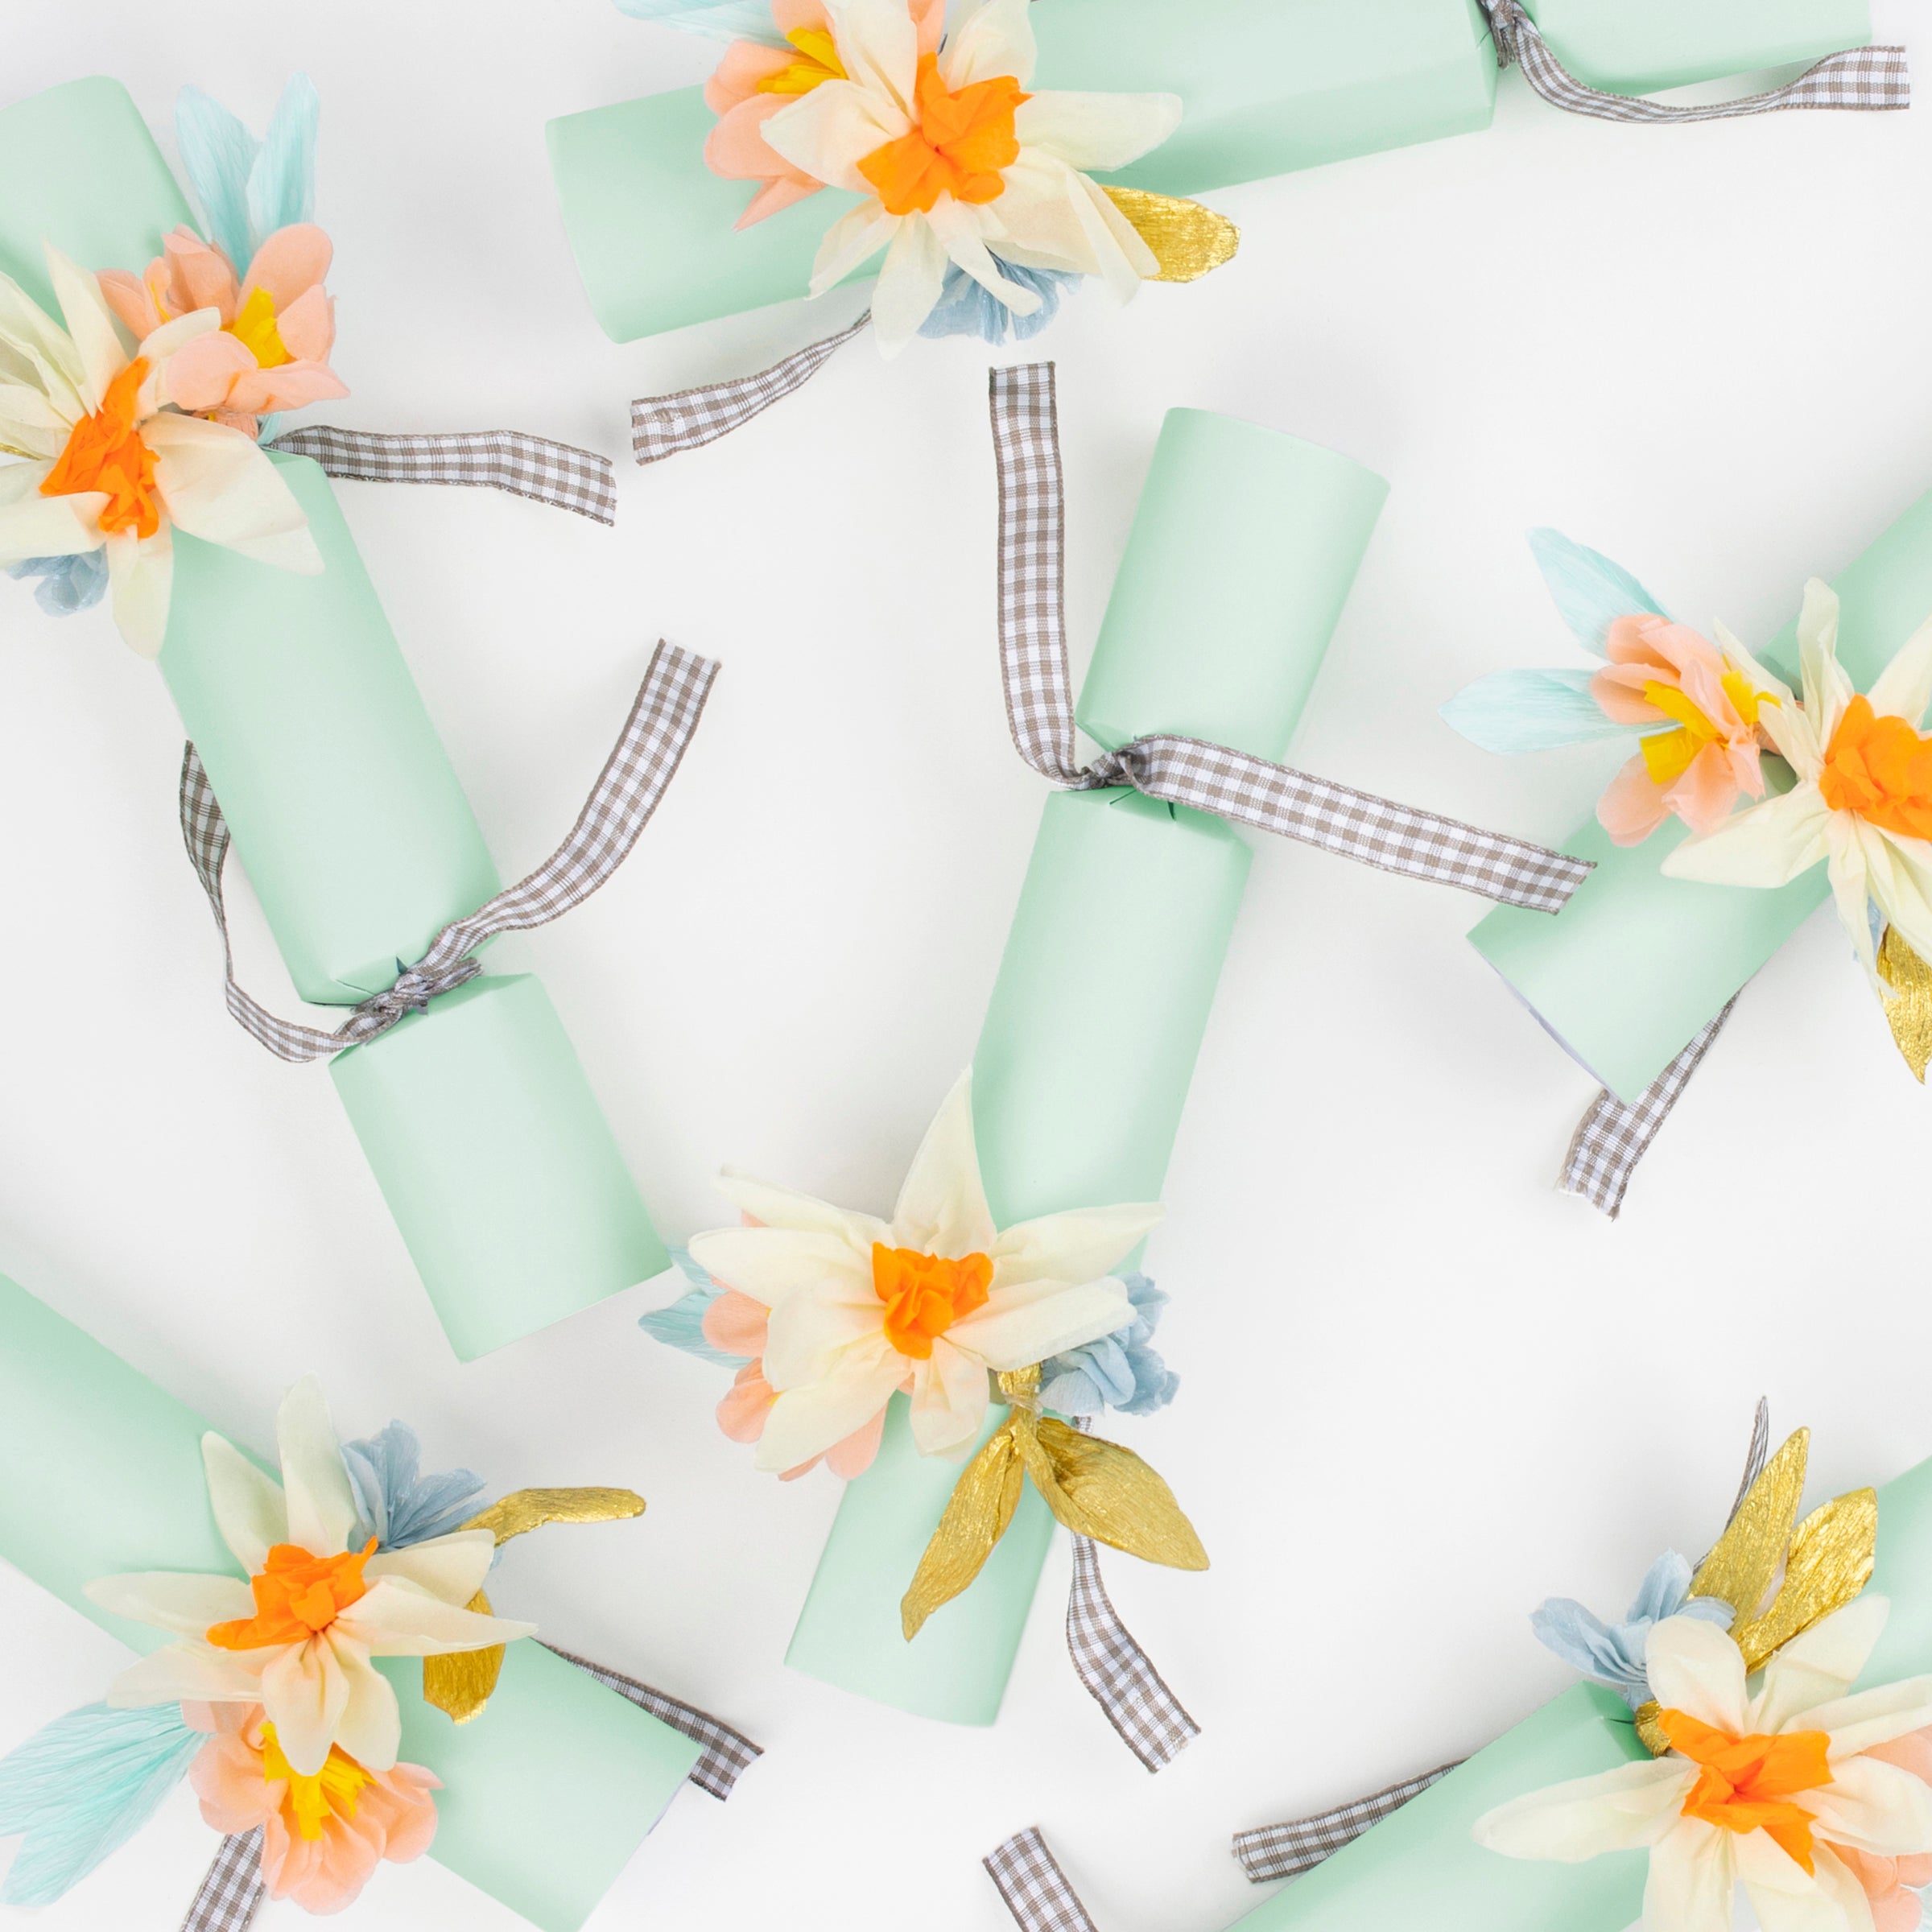 Our Easter crackers are decorated with beautiful crepe paper flowers and contain glitter flower brooches.